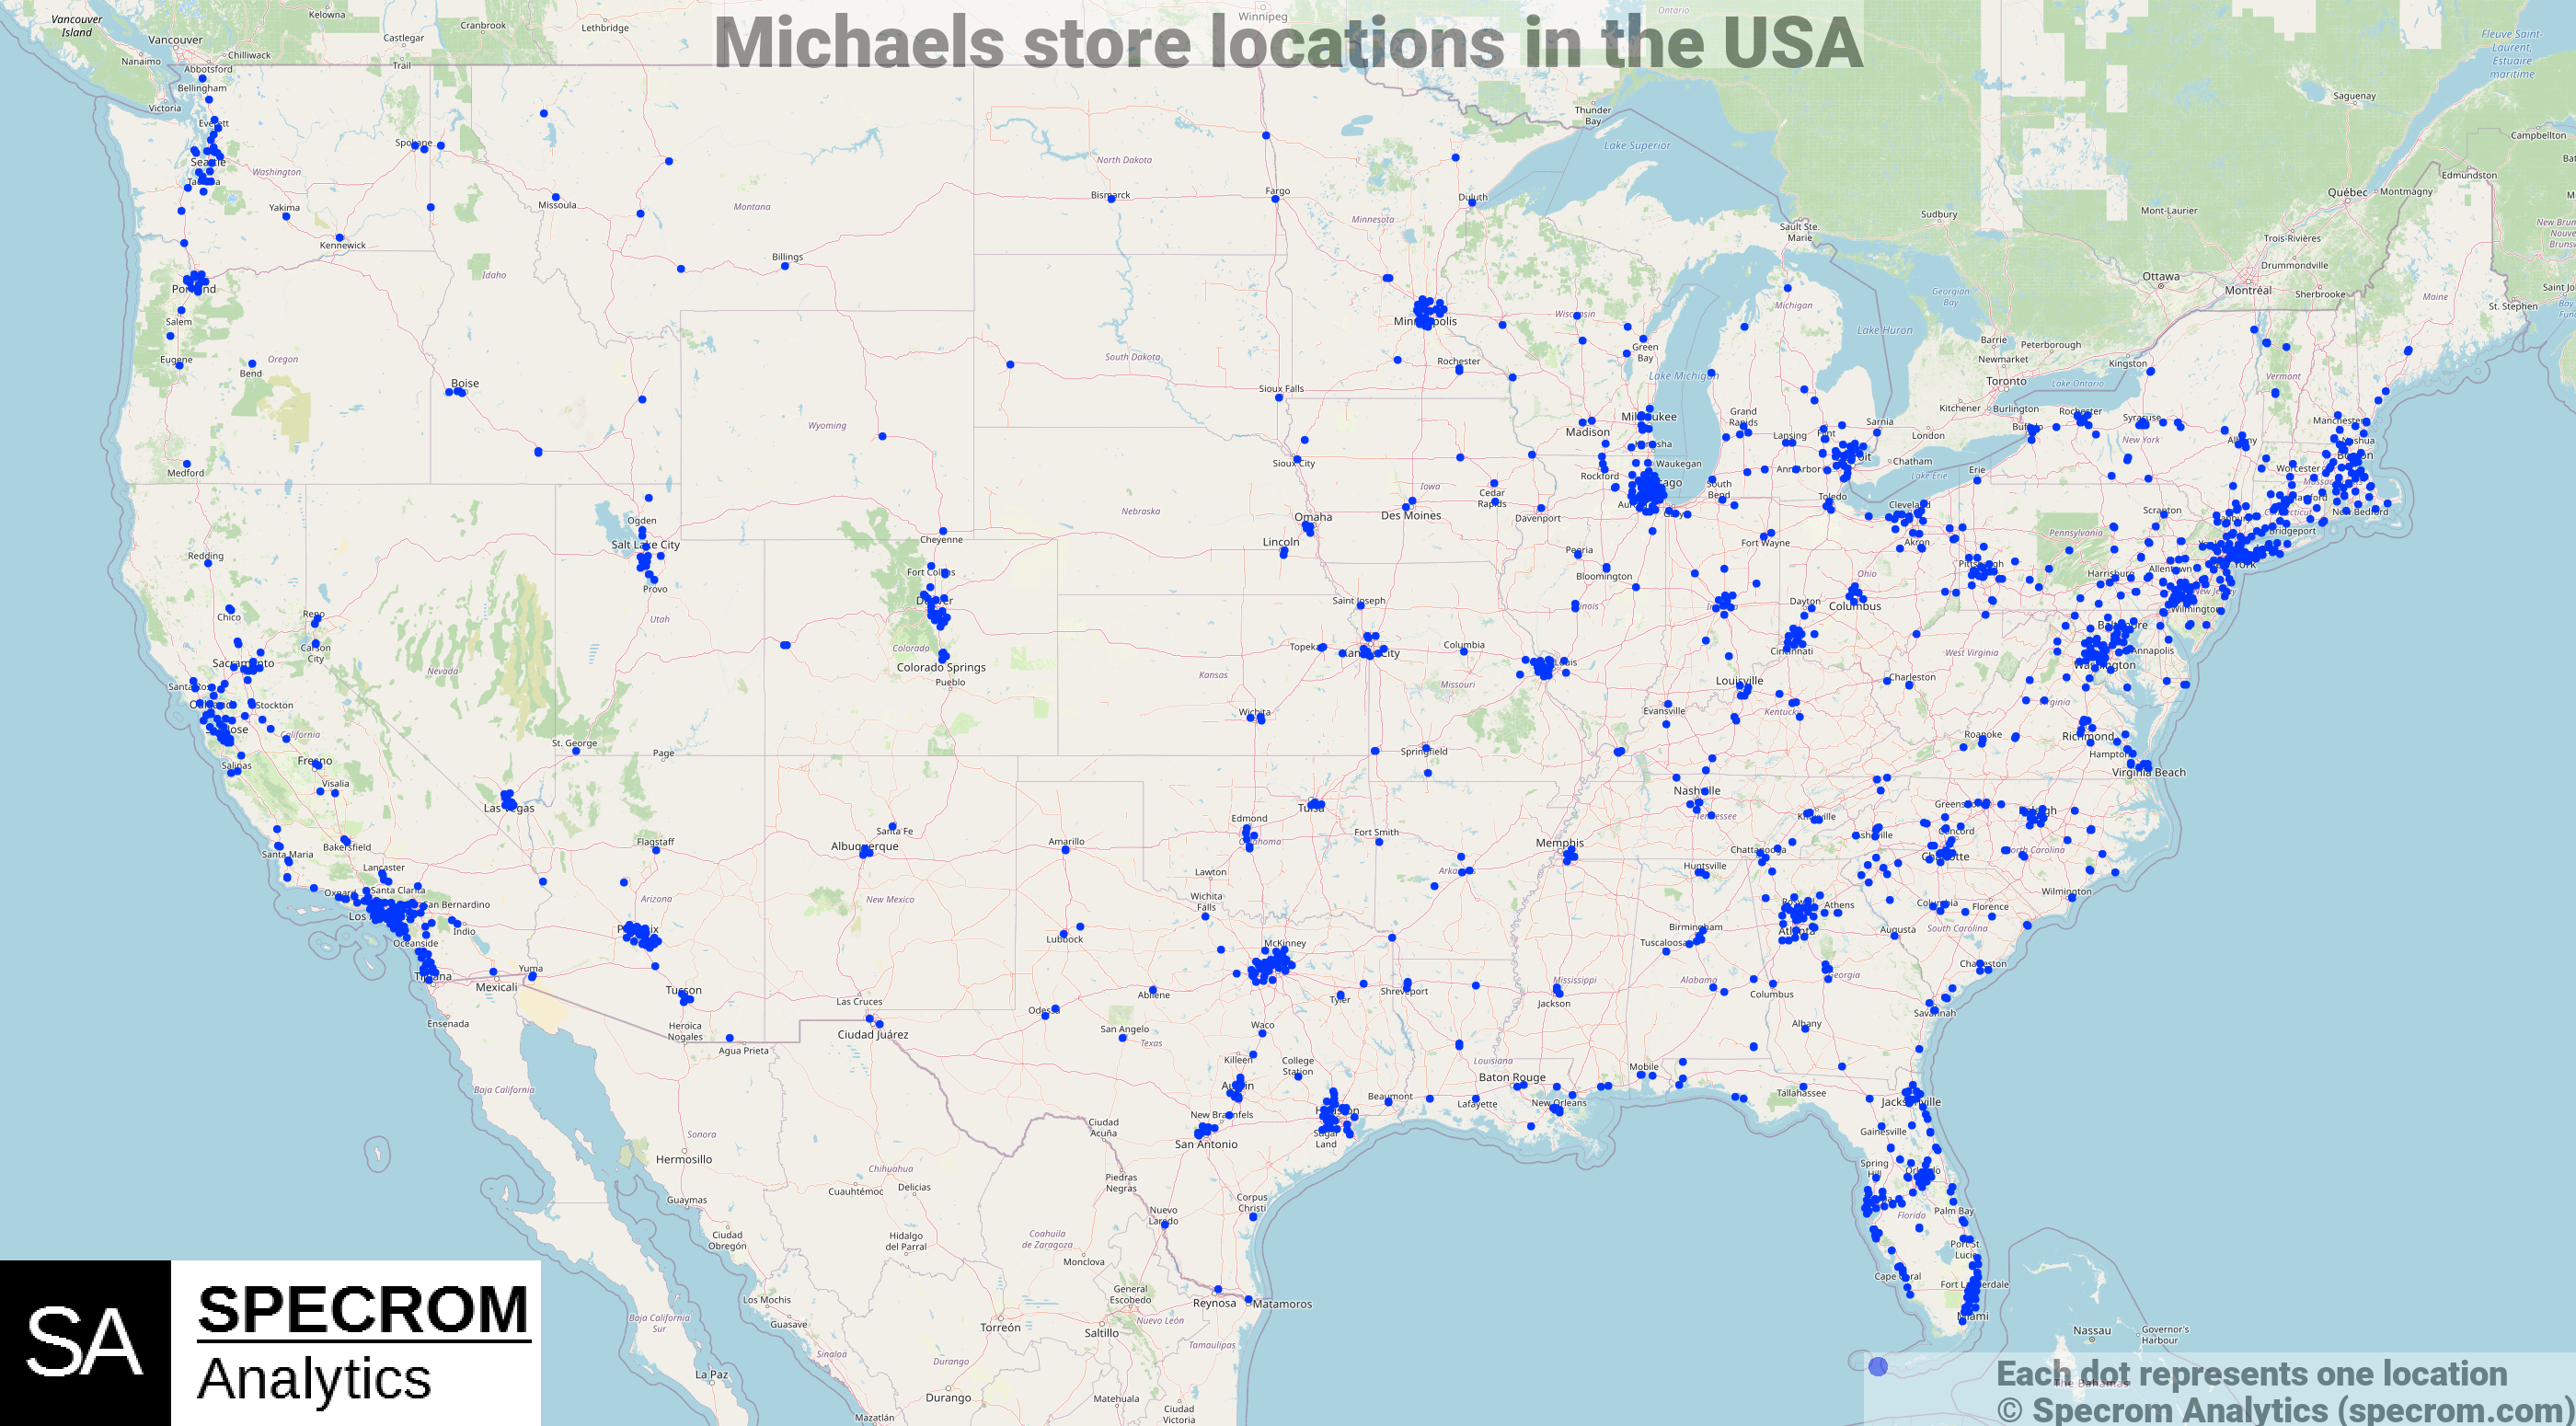 Michaels store locations in the USA